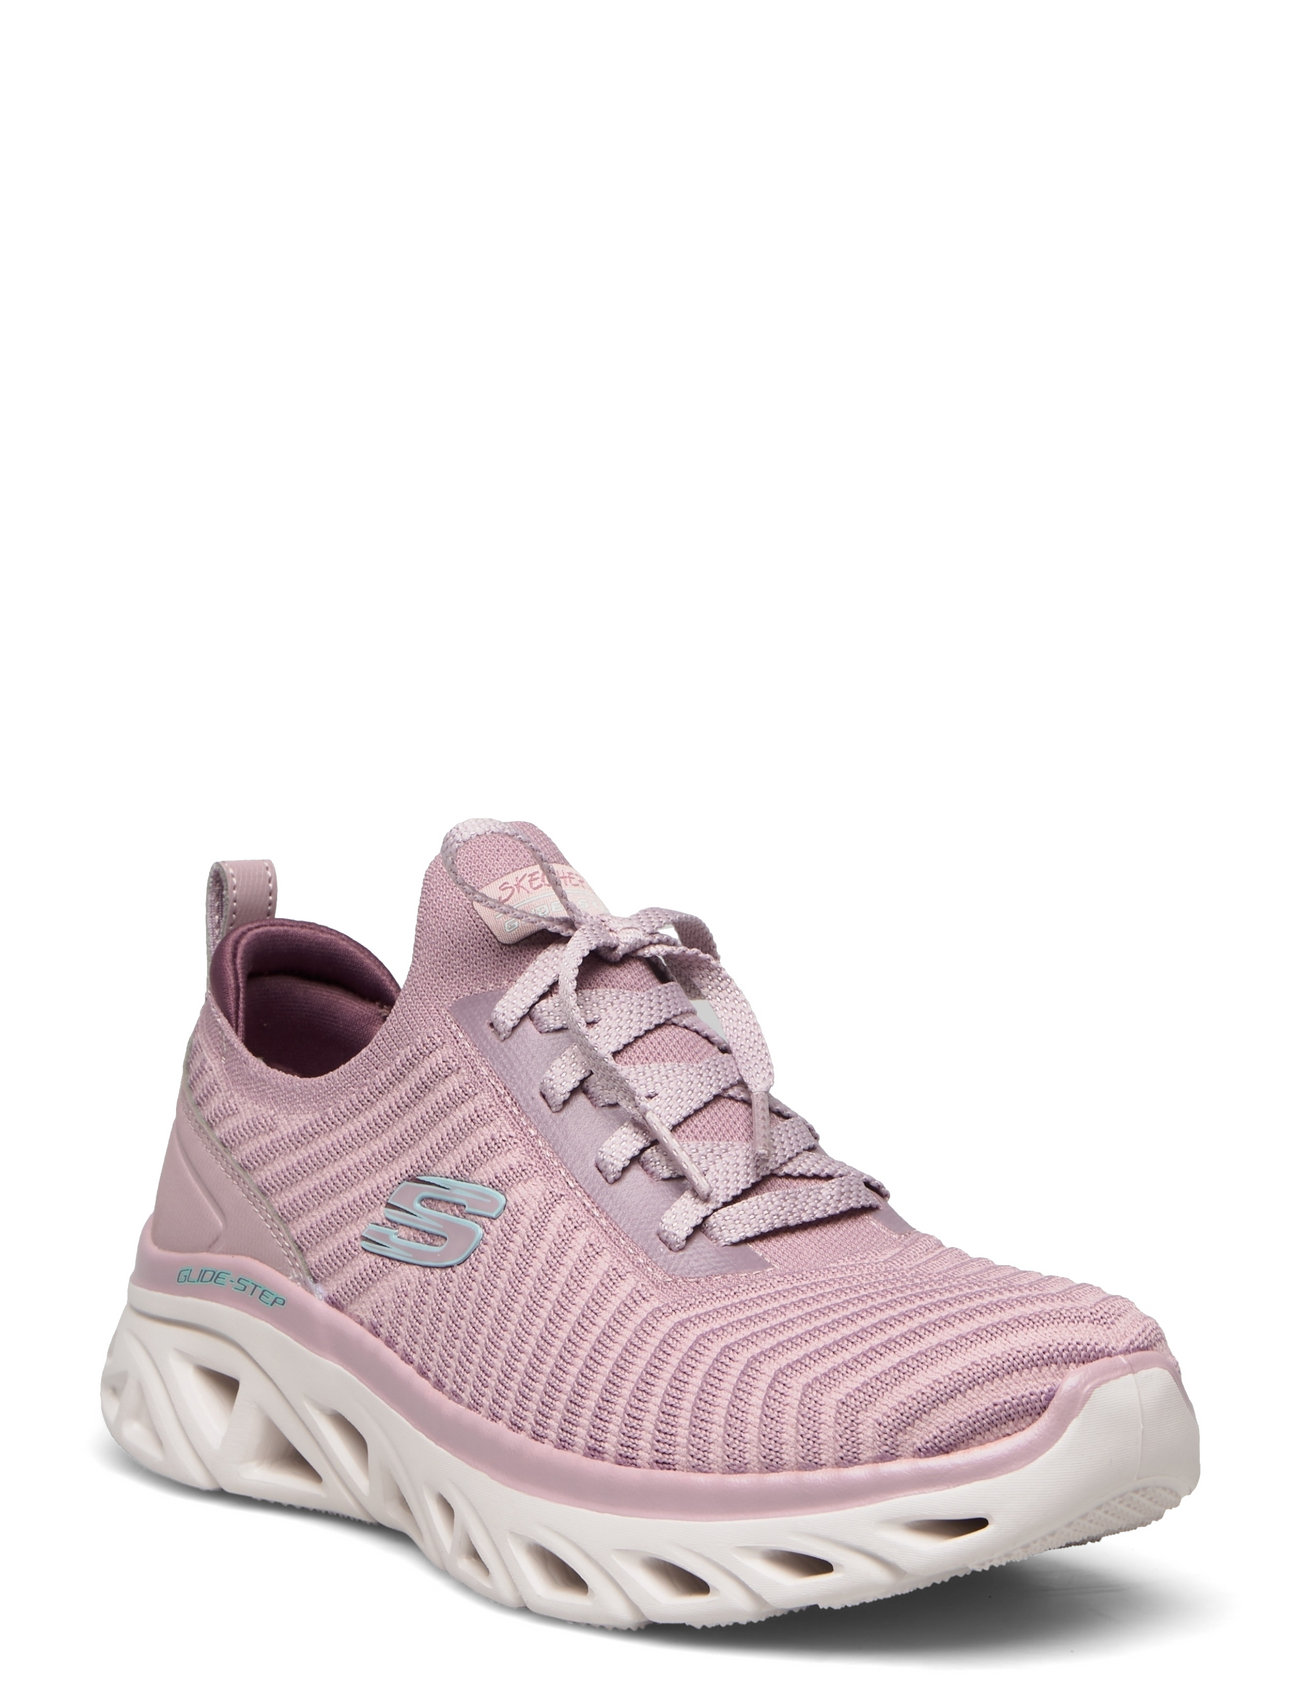 Skechers Womens Glide-step Sport - New - Lave sneakers - Boozt.com